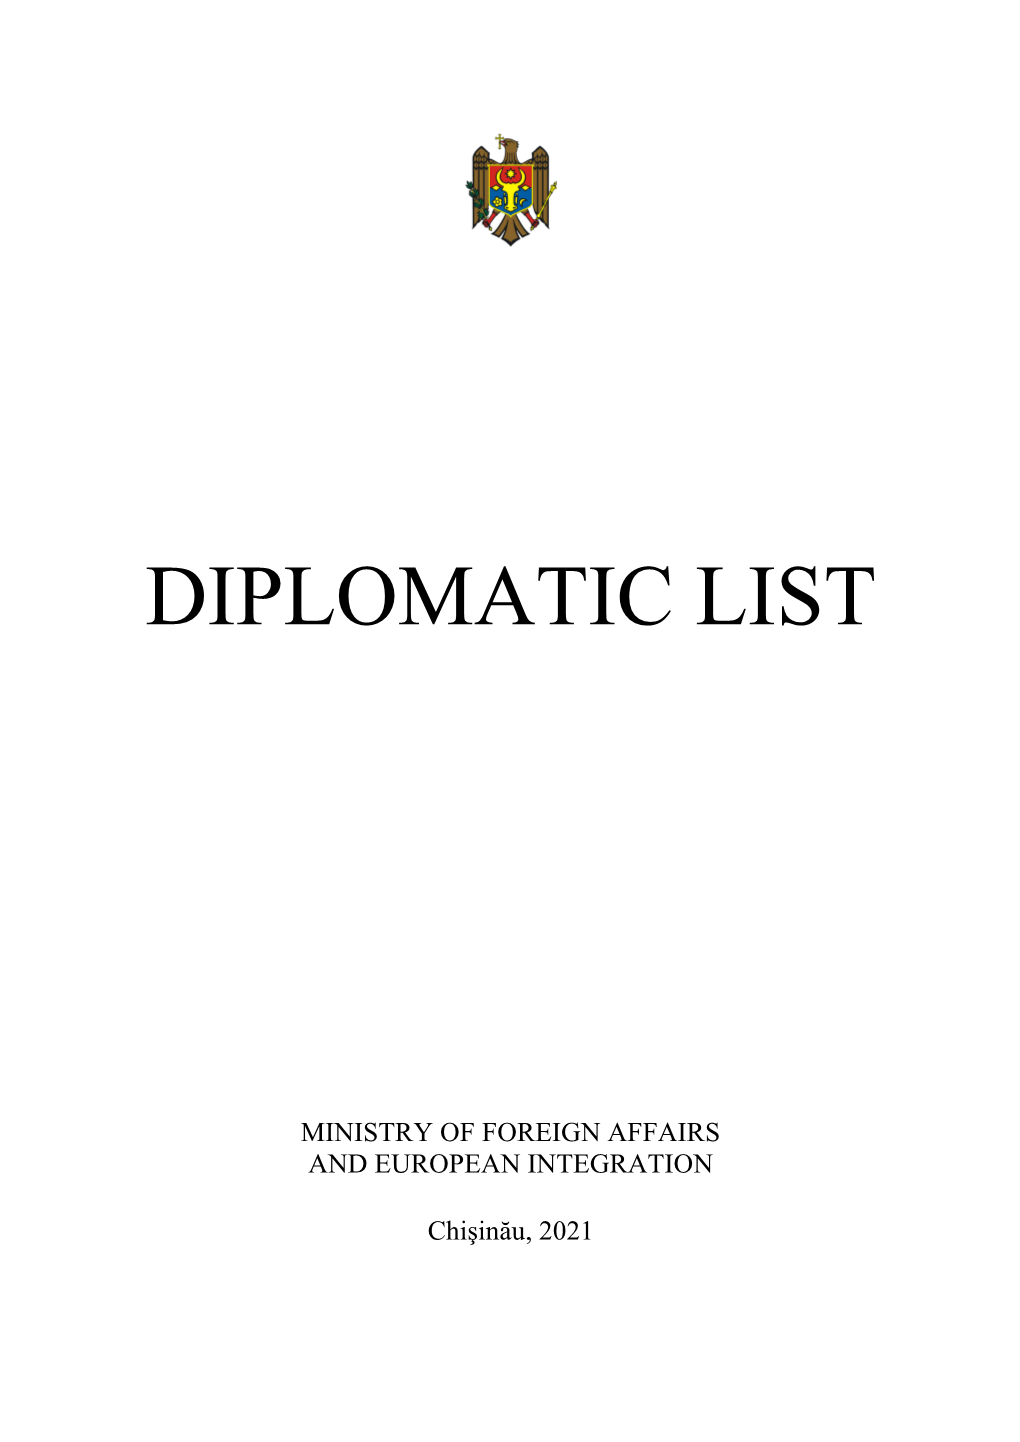 List of the Diplomatic Corps